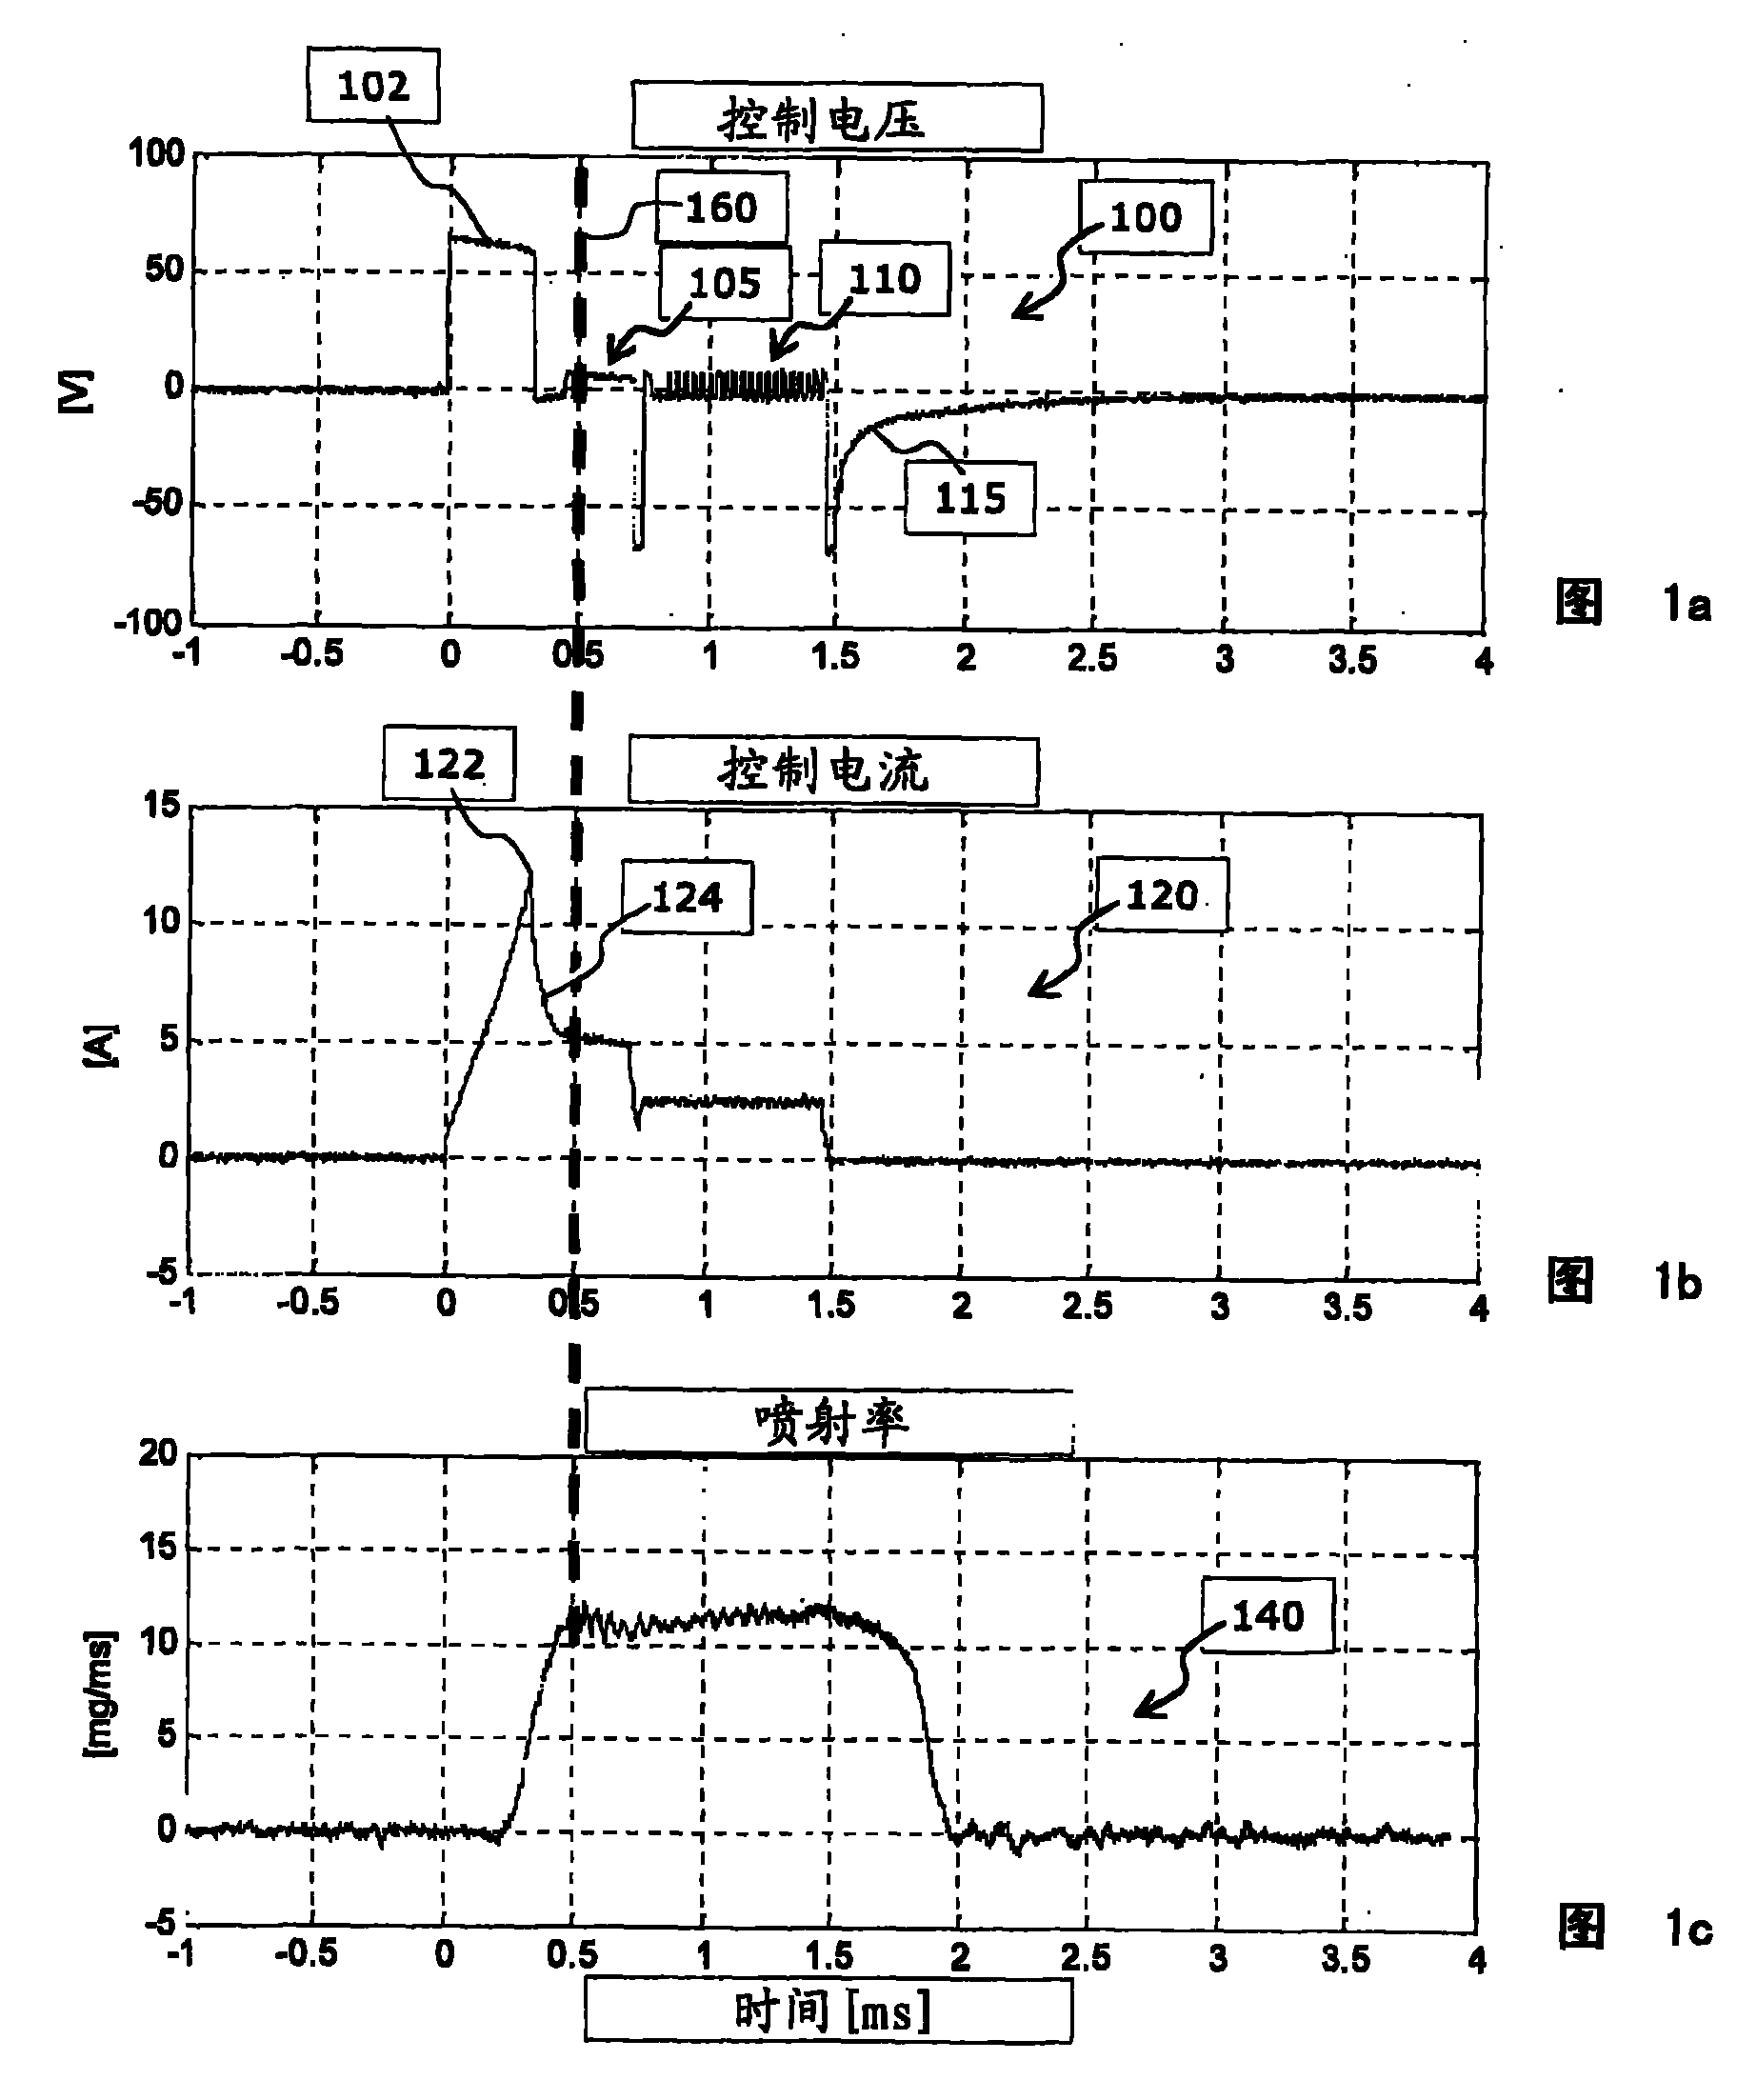 Modified electrical actuation of actuator for determining the time at which armature stops